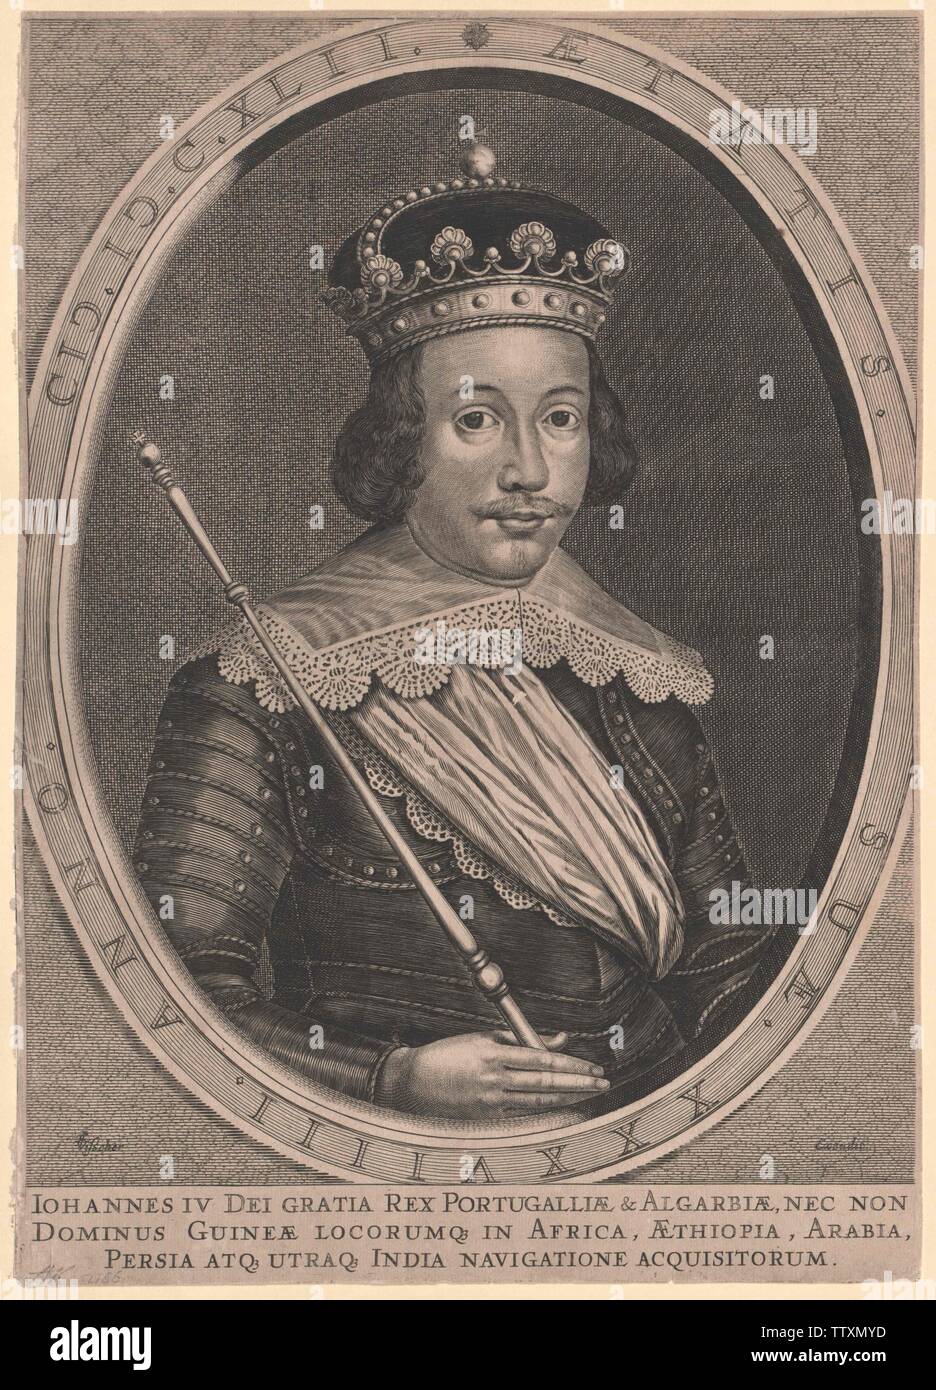 Johann IV, King of Portugal, Additional-Rights-Clearance-Info-Not-Available Stock Photo